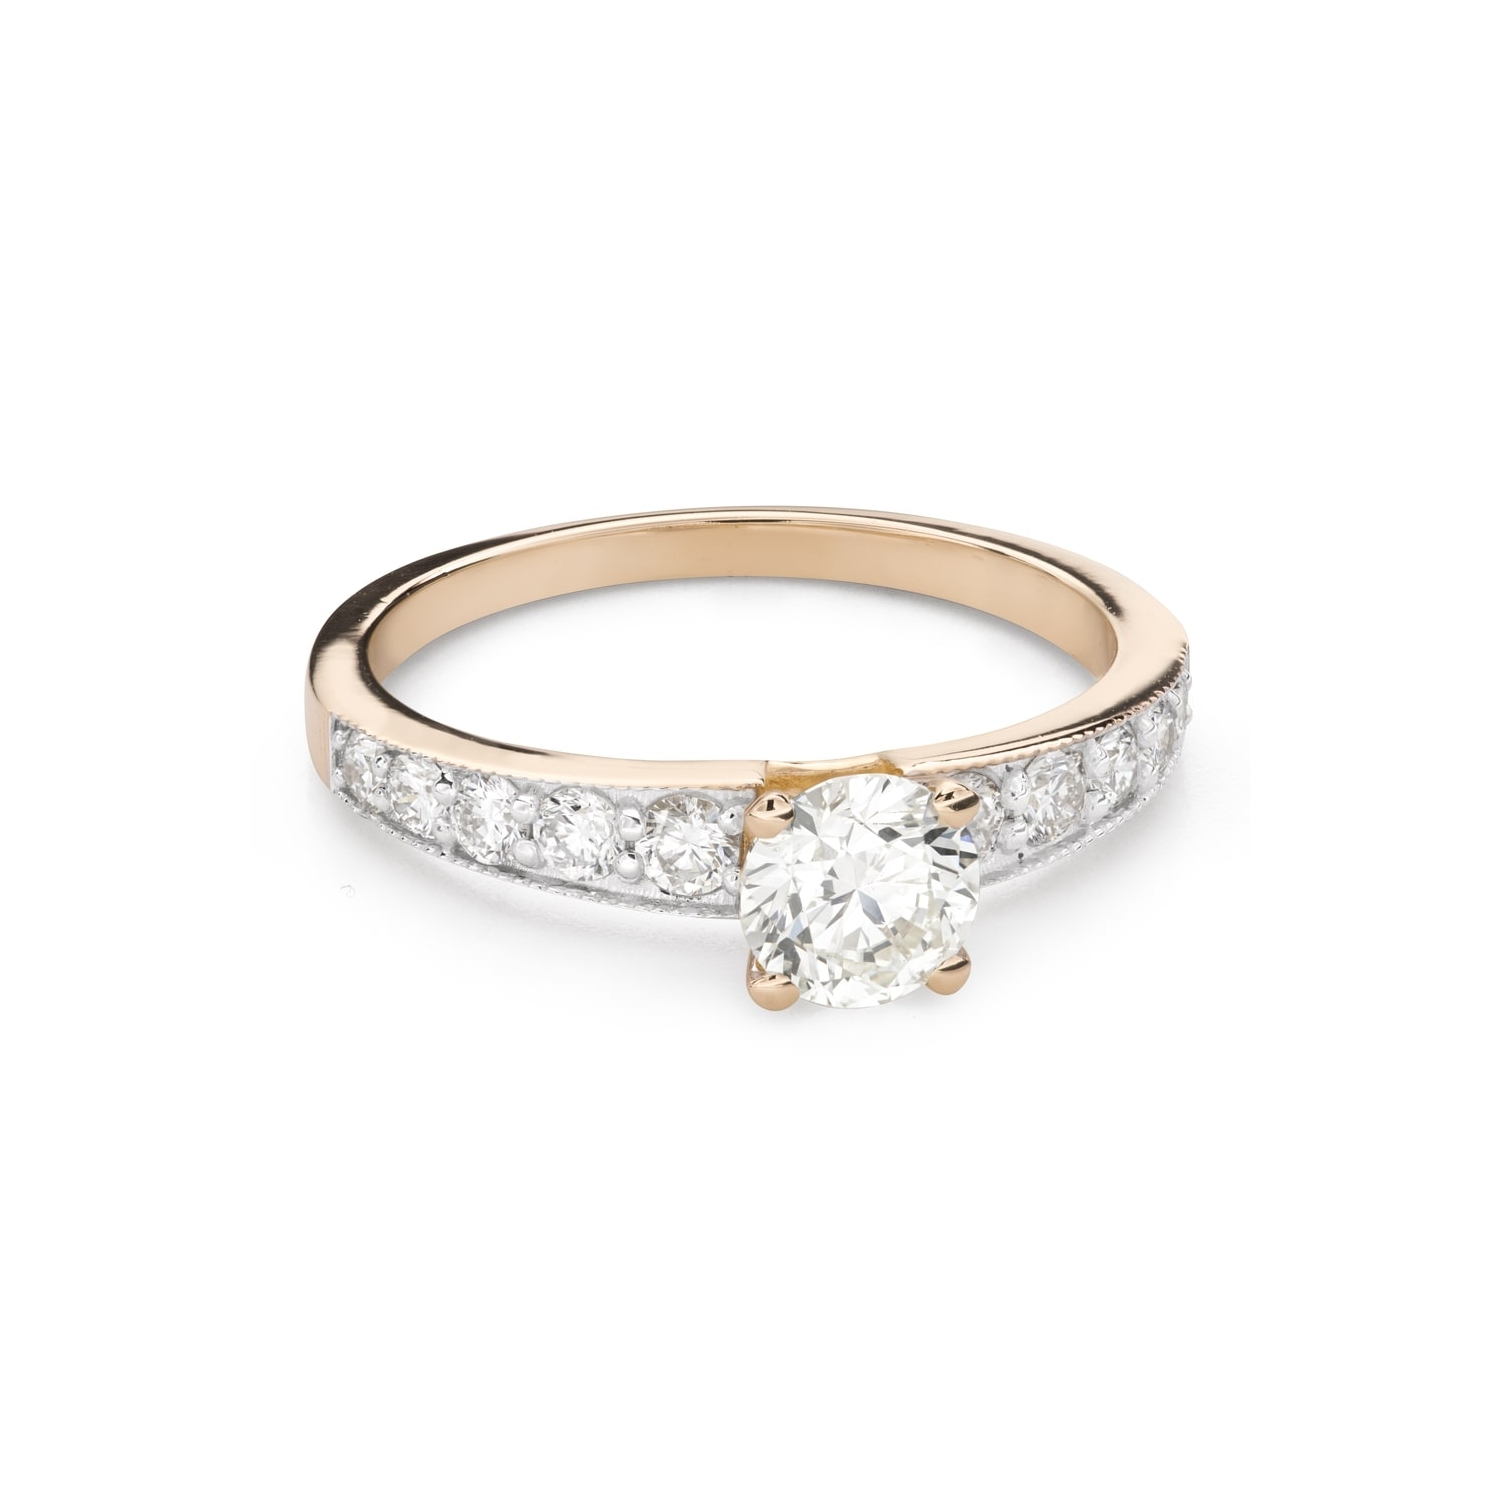 Engagment ring with brilliants "Grace 250"